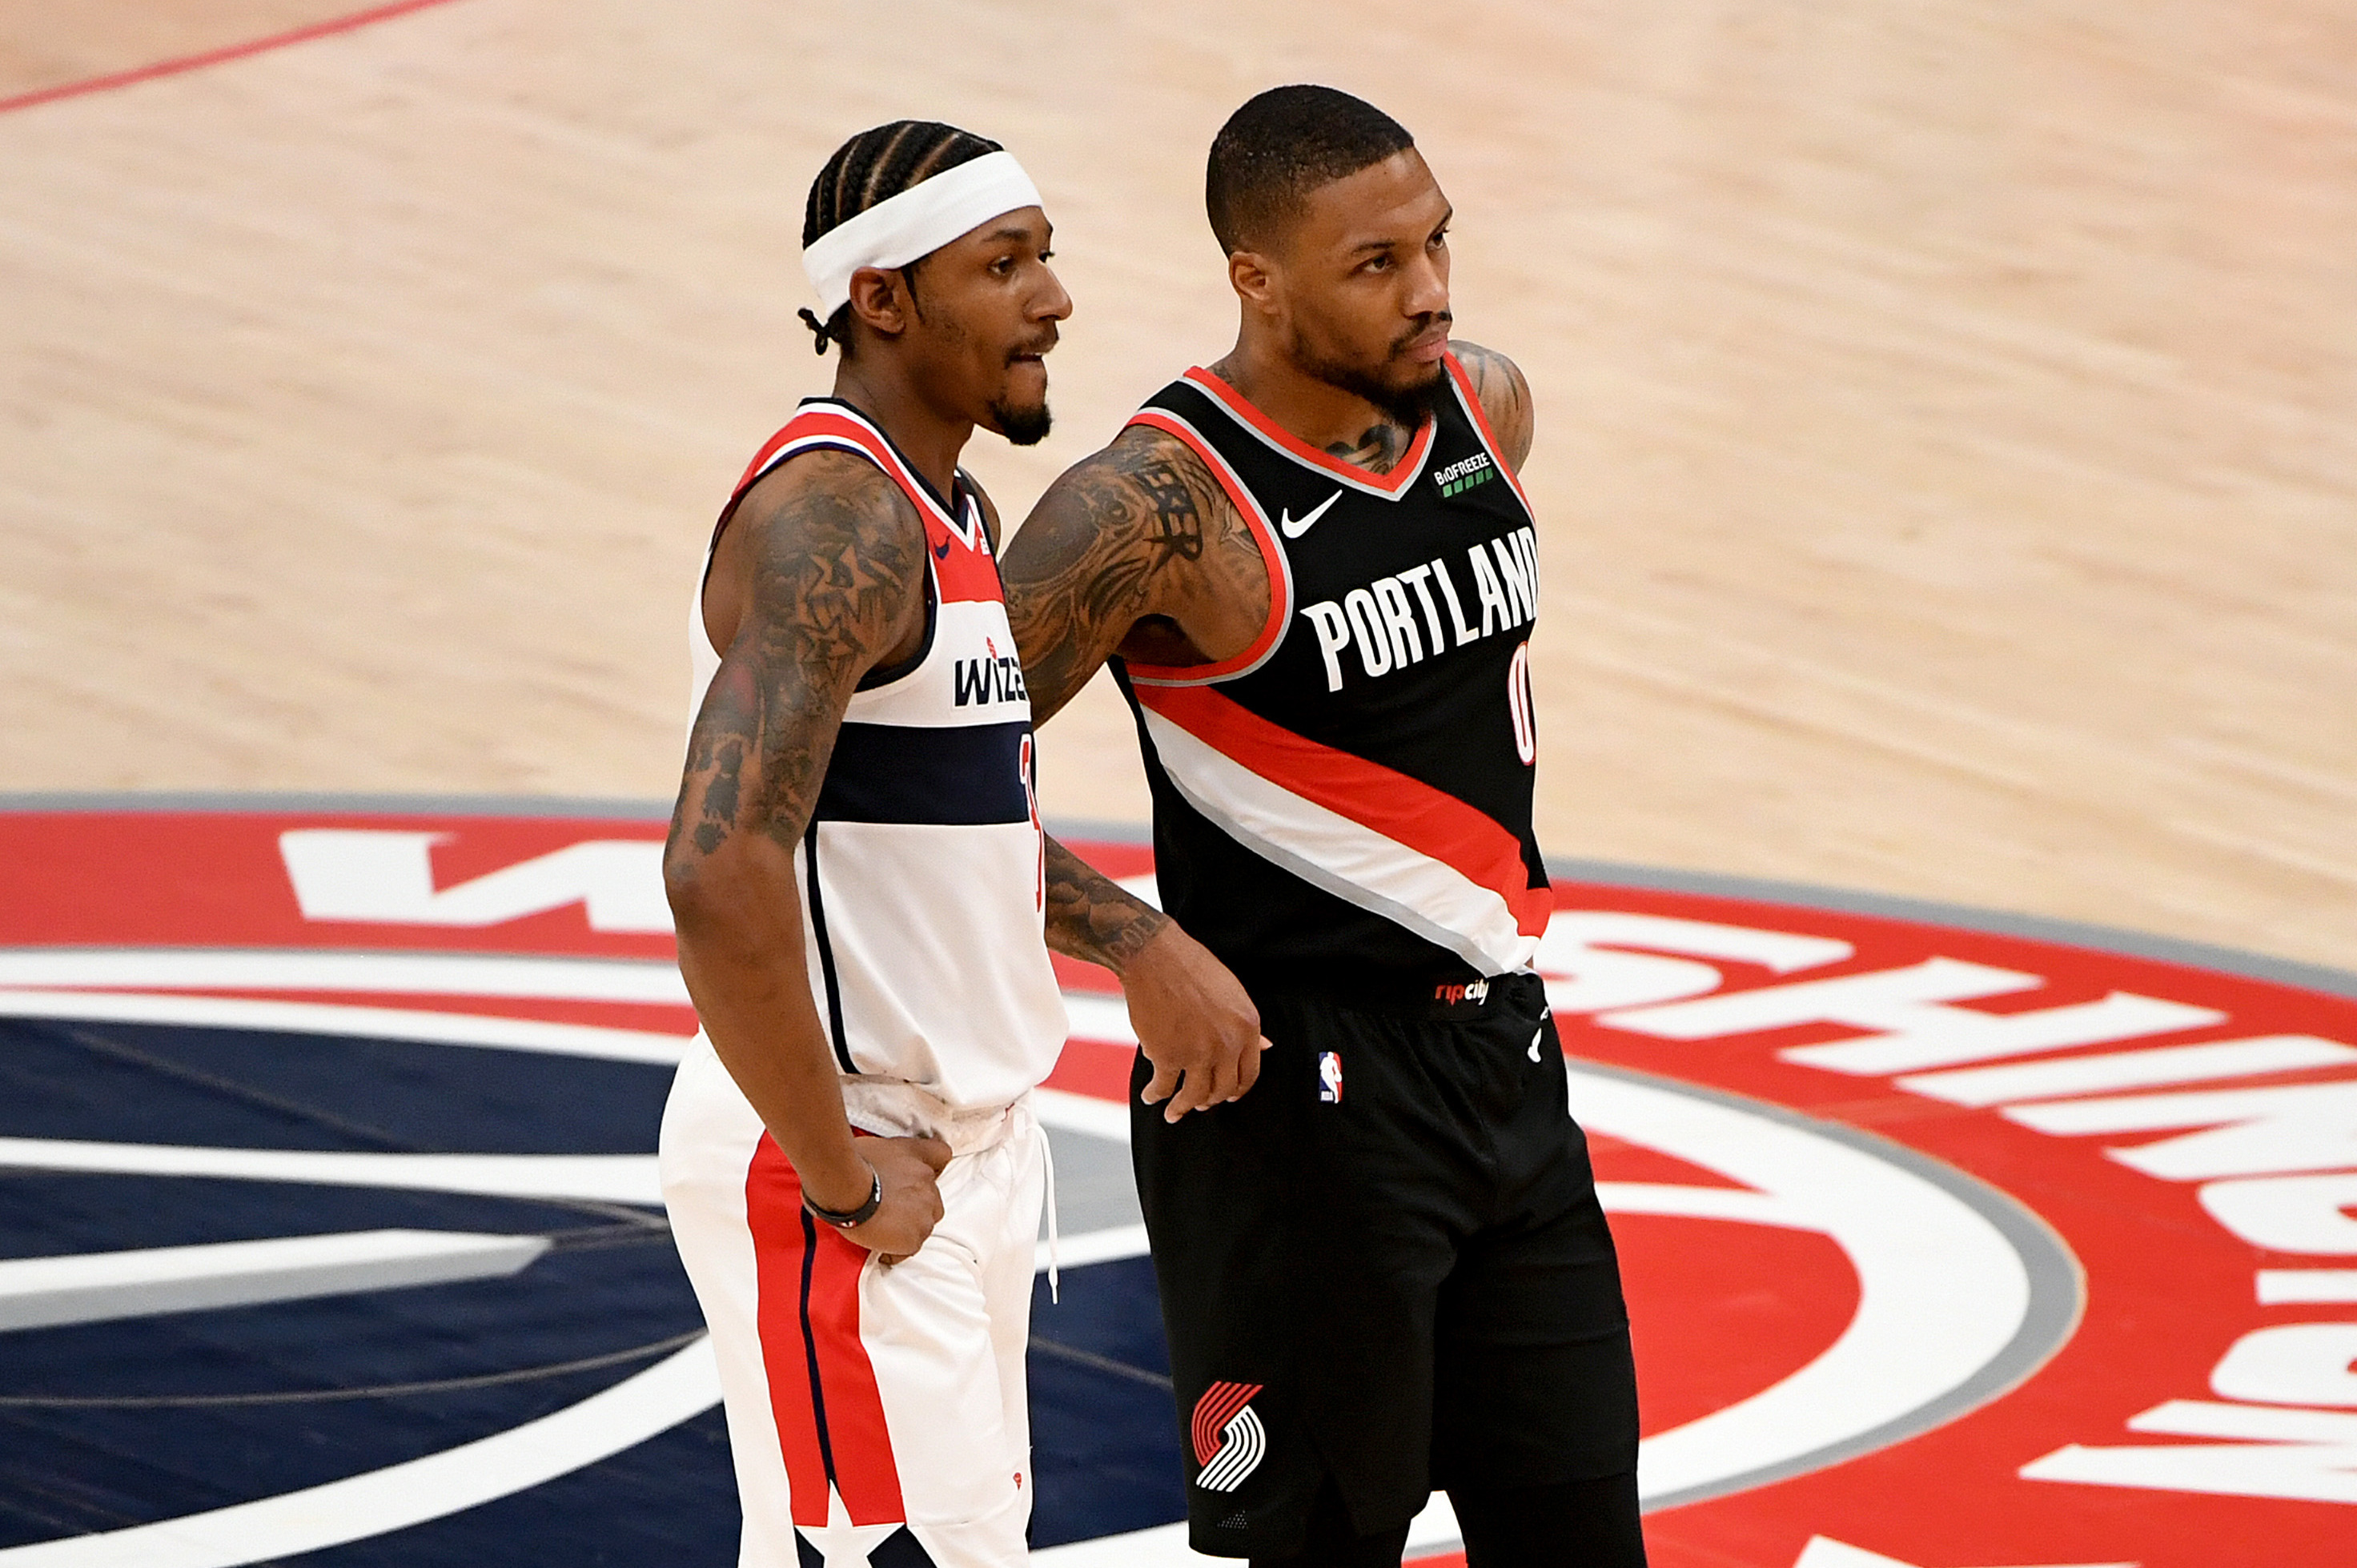 Bradley Beal will not be a Sixer, and that's very much a good